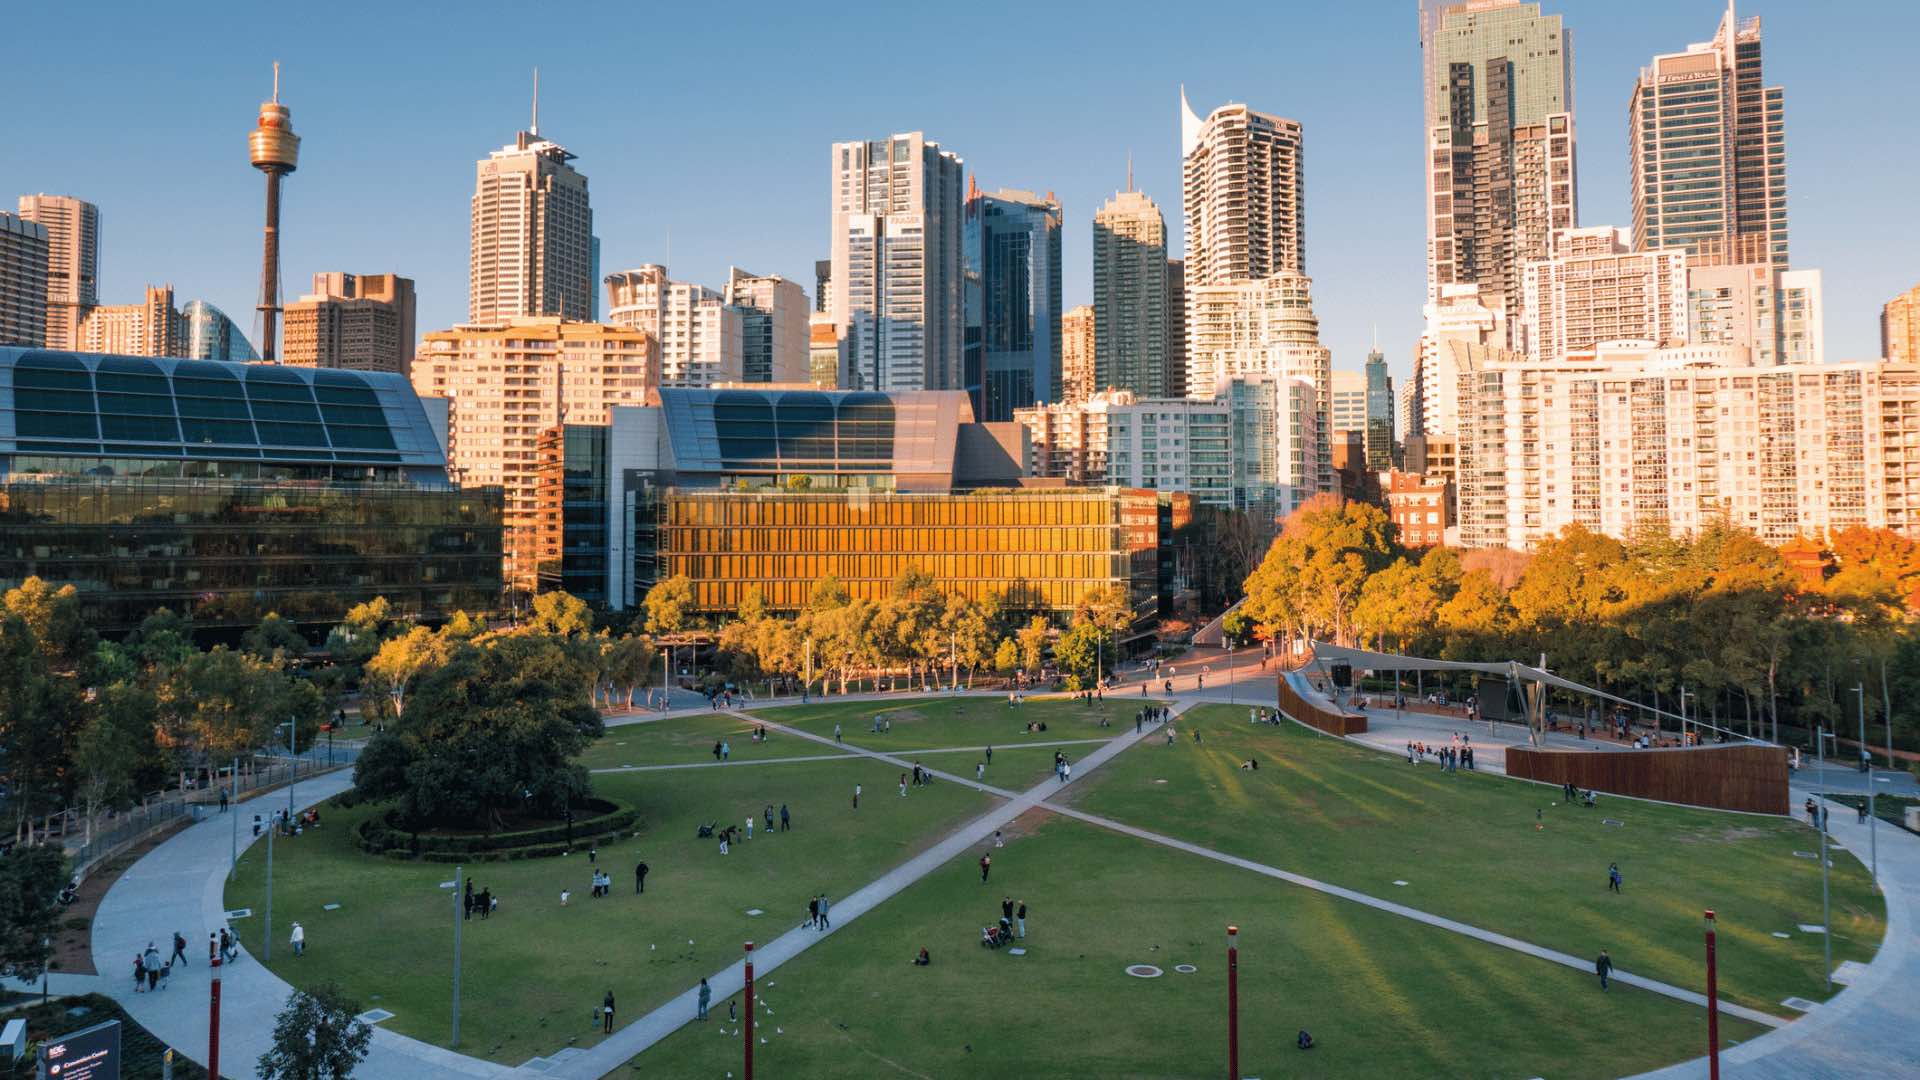 Photo of Tumbalong Park with the city skyline behind it.